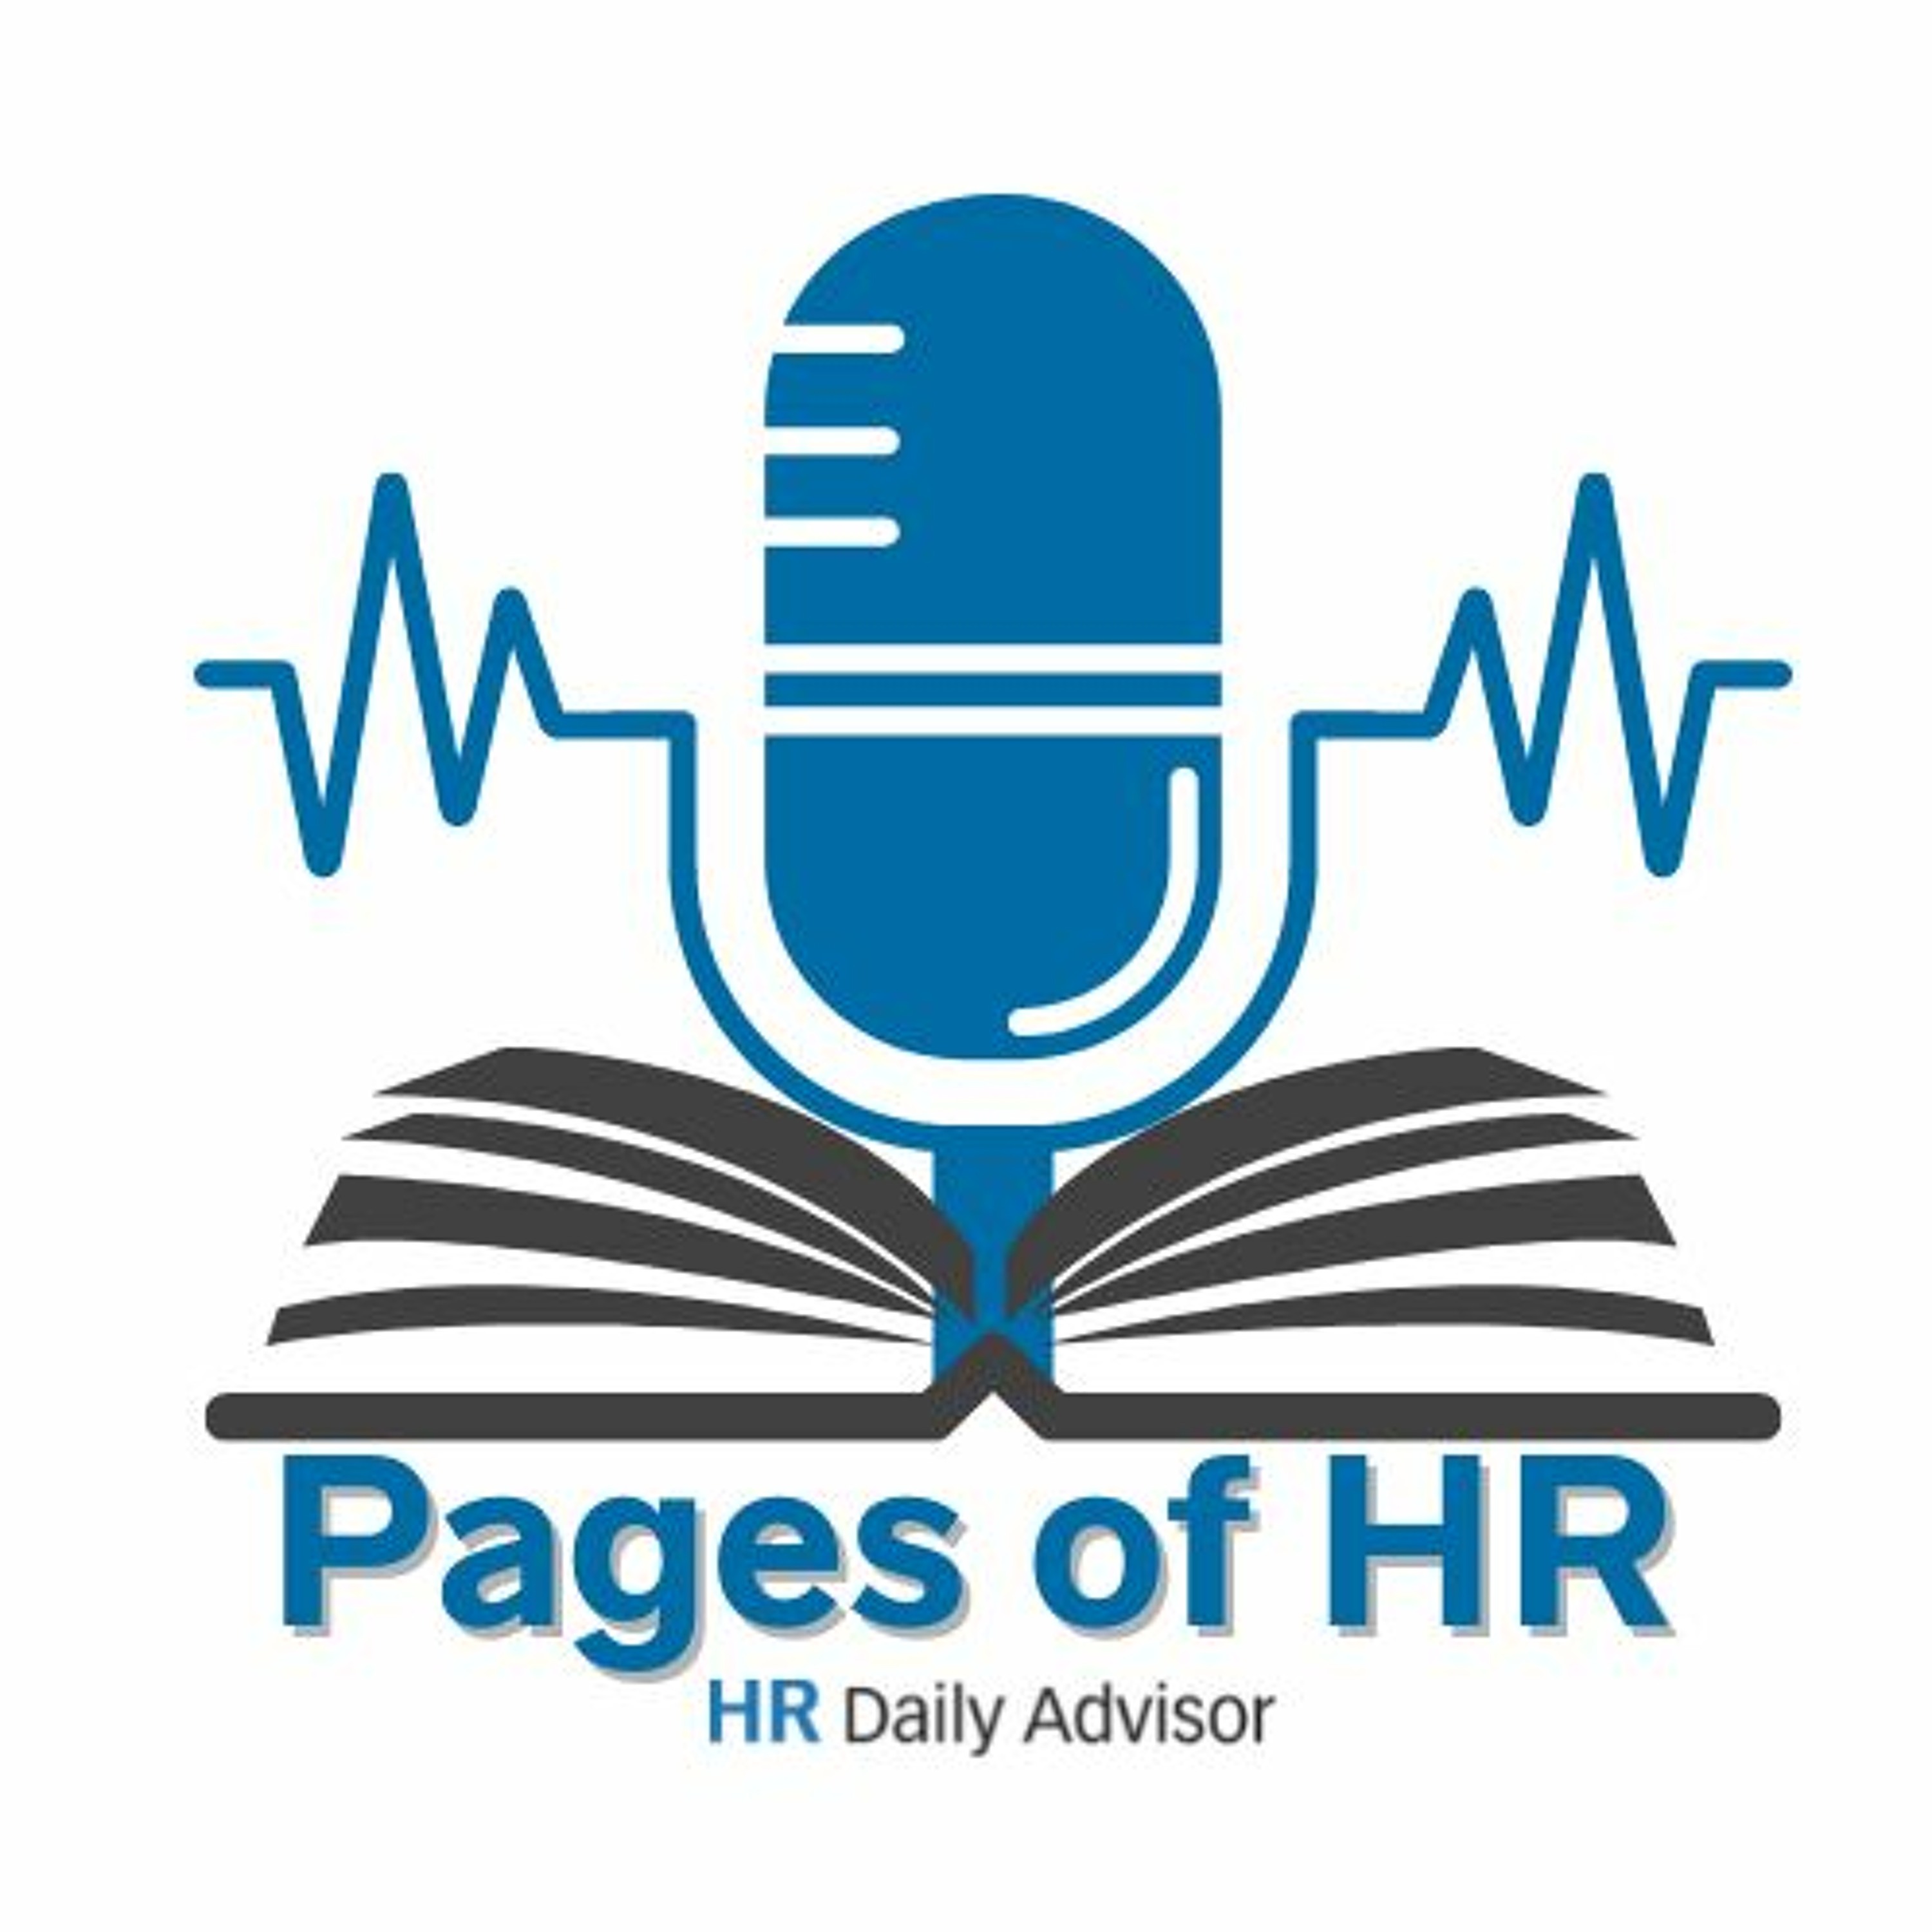 HR Works Presents Pages of HR: Reconstructing Inclusion